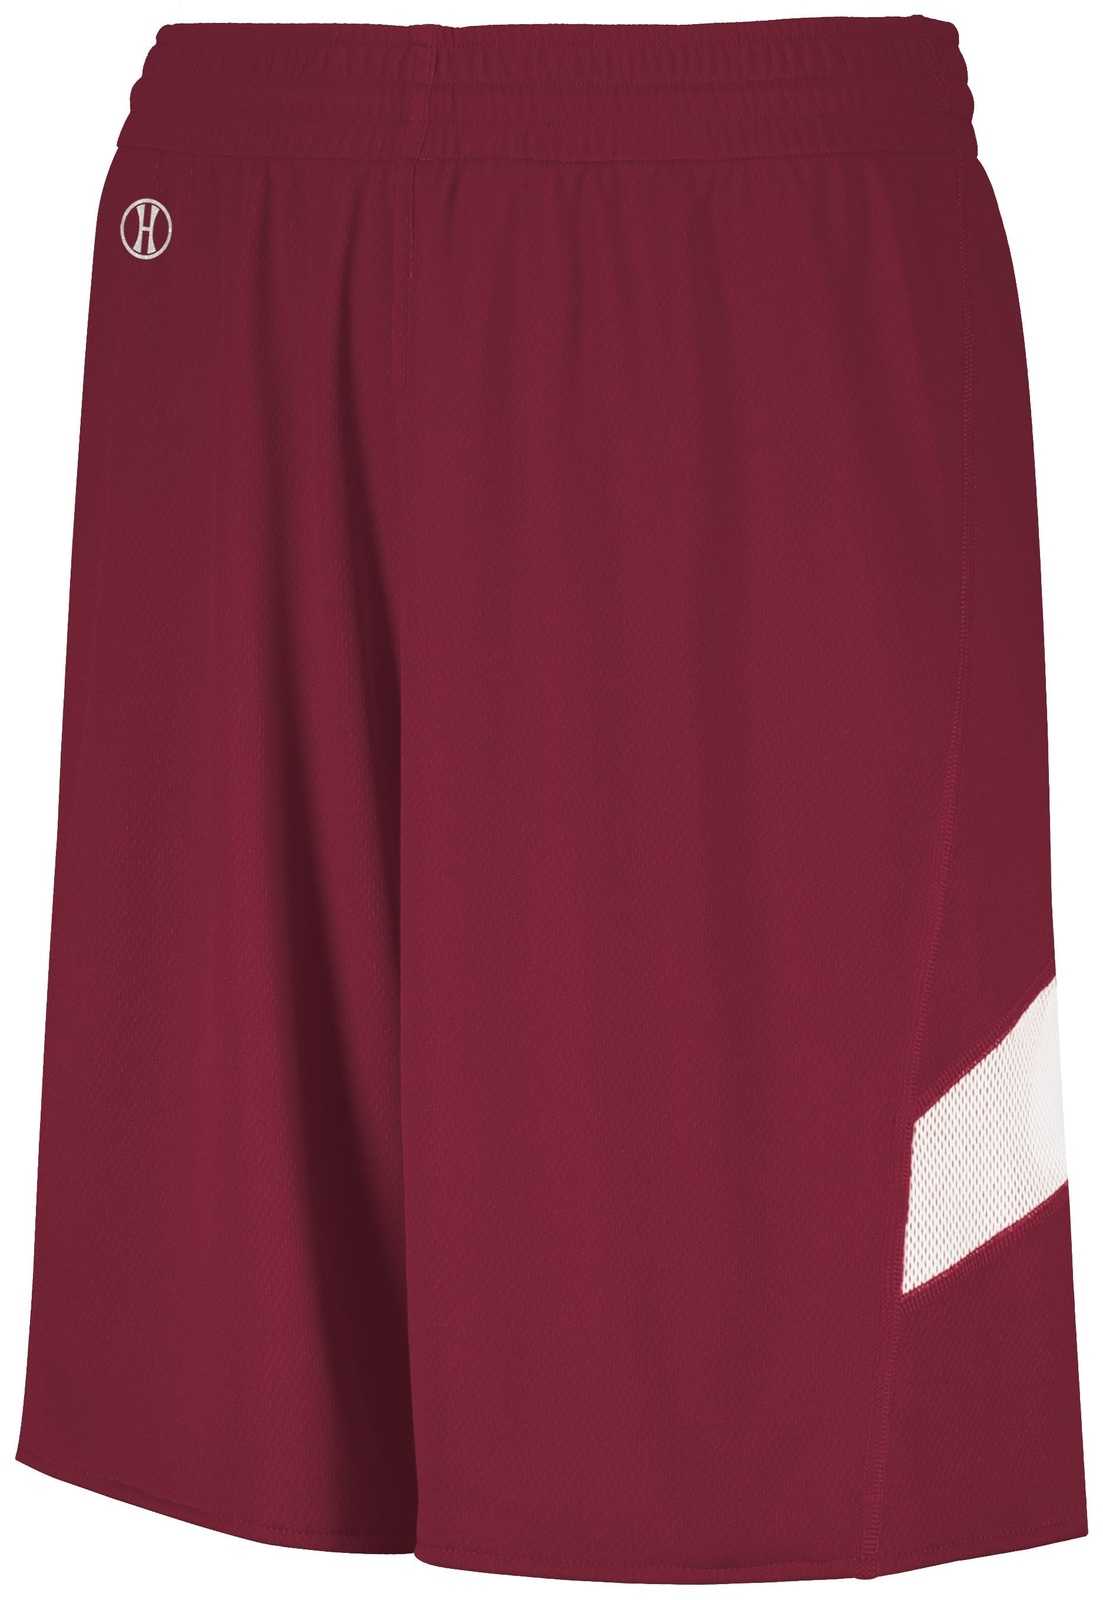 Holloway 224279 Youth Dual-Side Single Ply Basketball Shorts - Cardinal White - HIT a Double